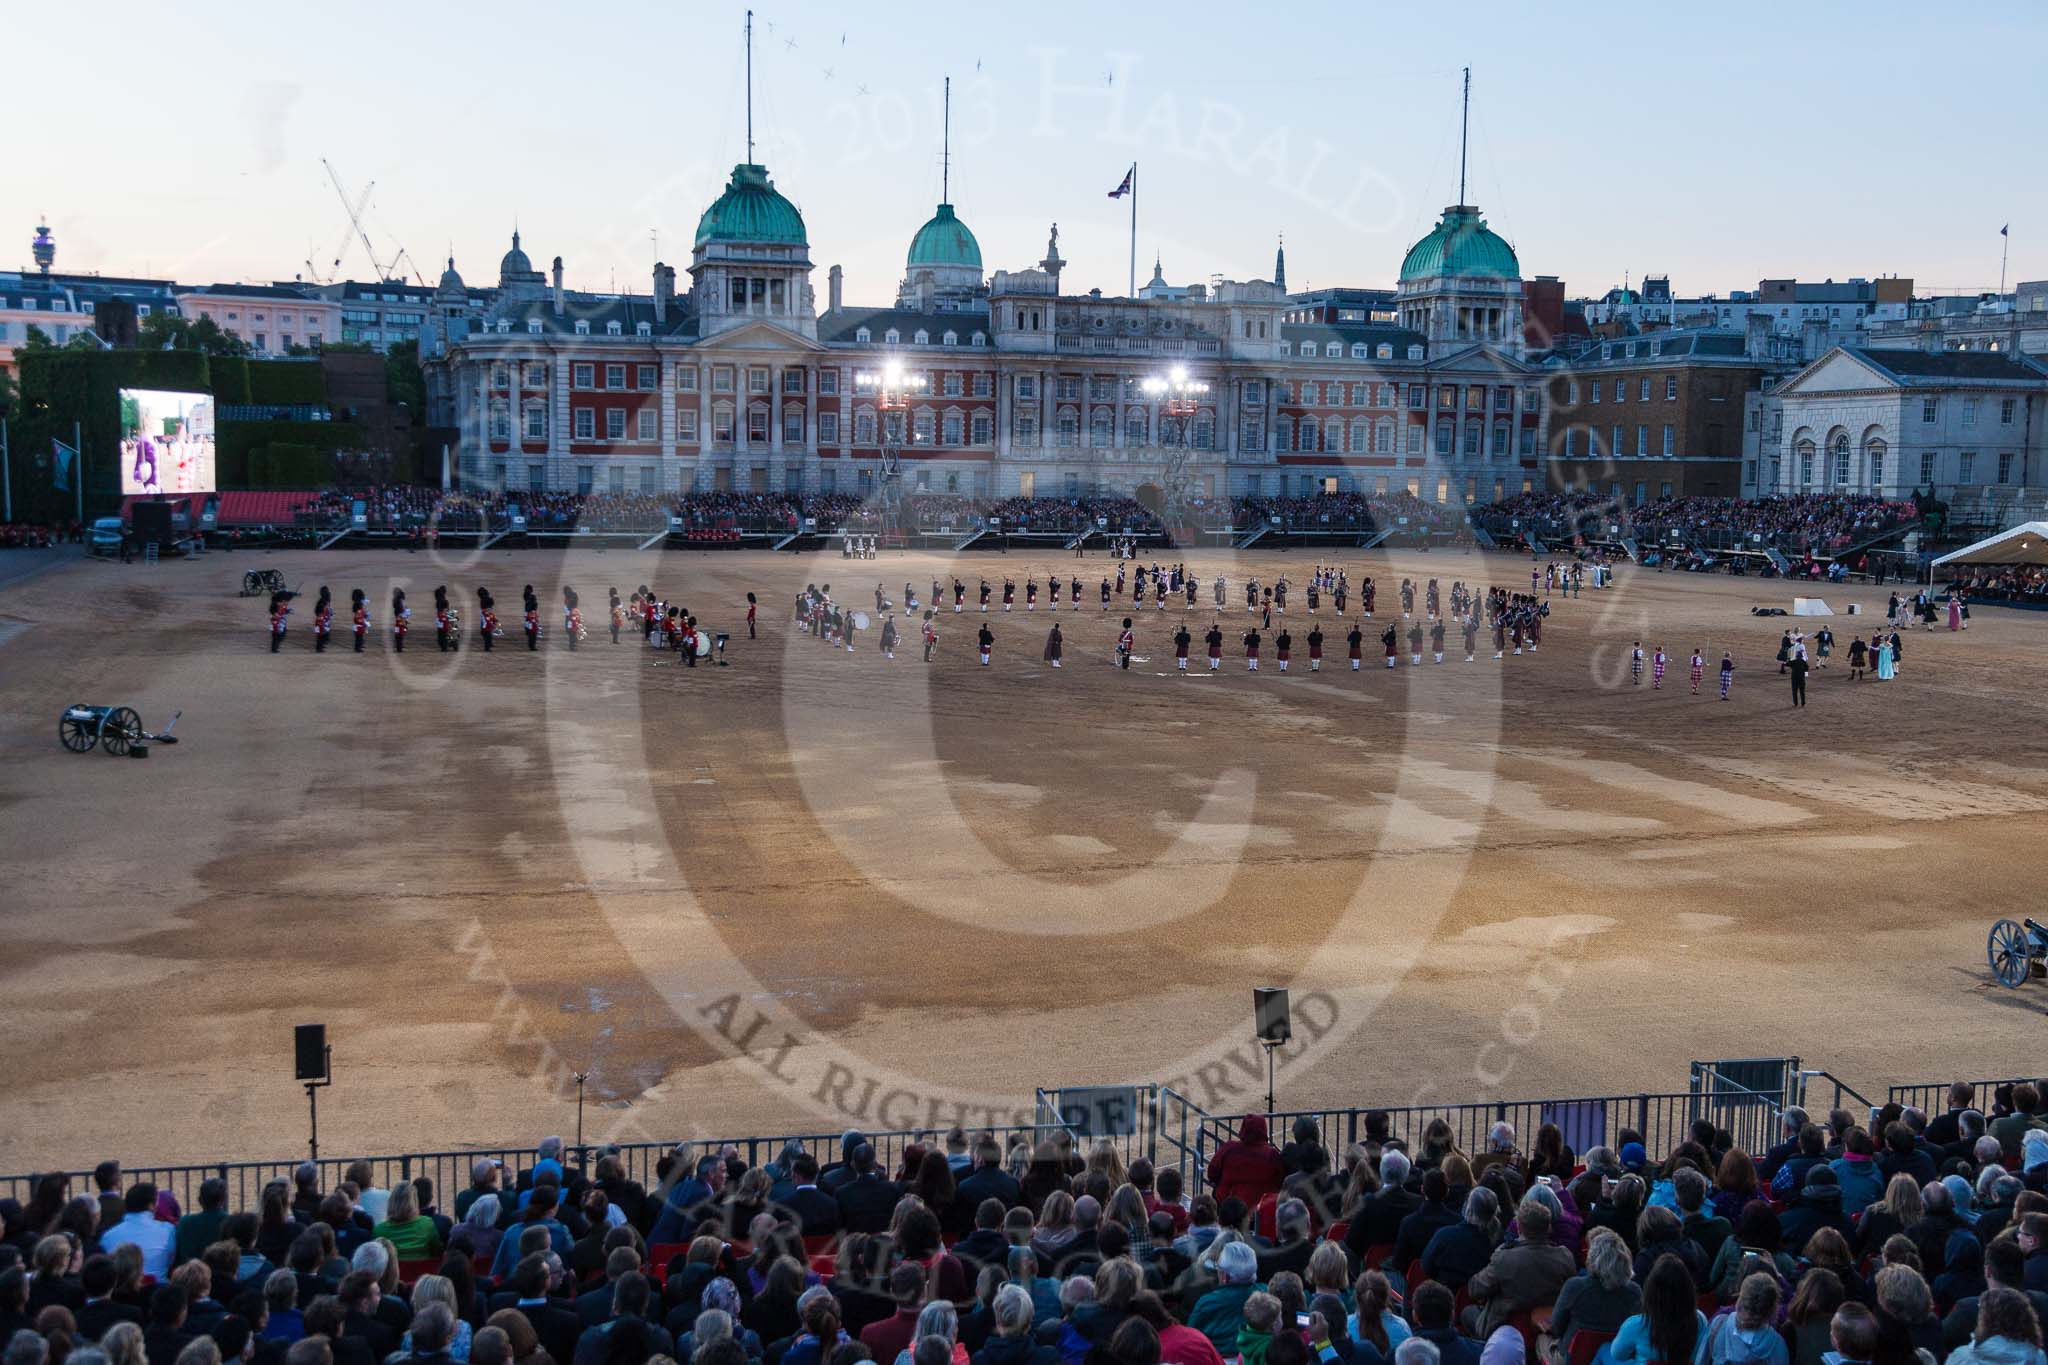 Beating Retreat 2015 - Waterloo 200.
Horse Guards Parade, Westminster,
London,

United Kingdom,
on 10 June 2015 at 21:19, image #307